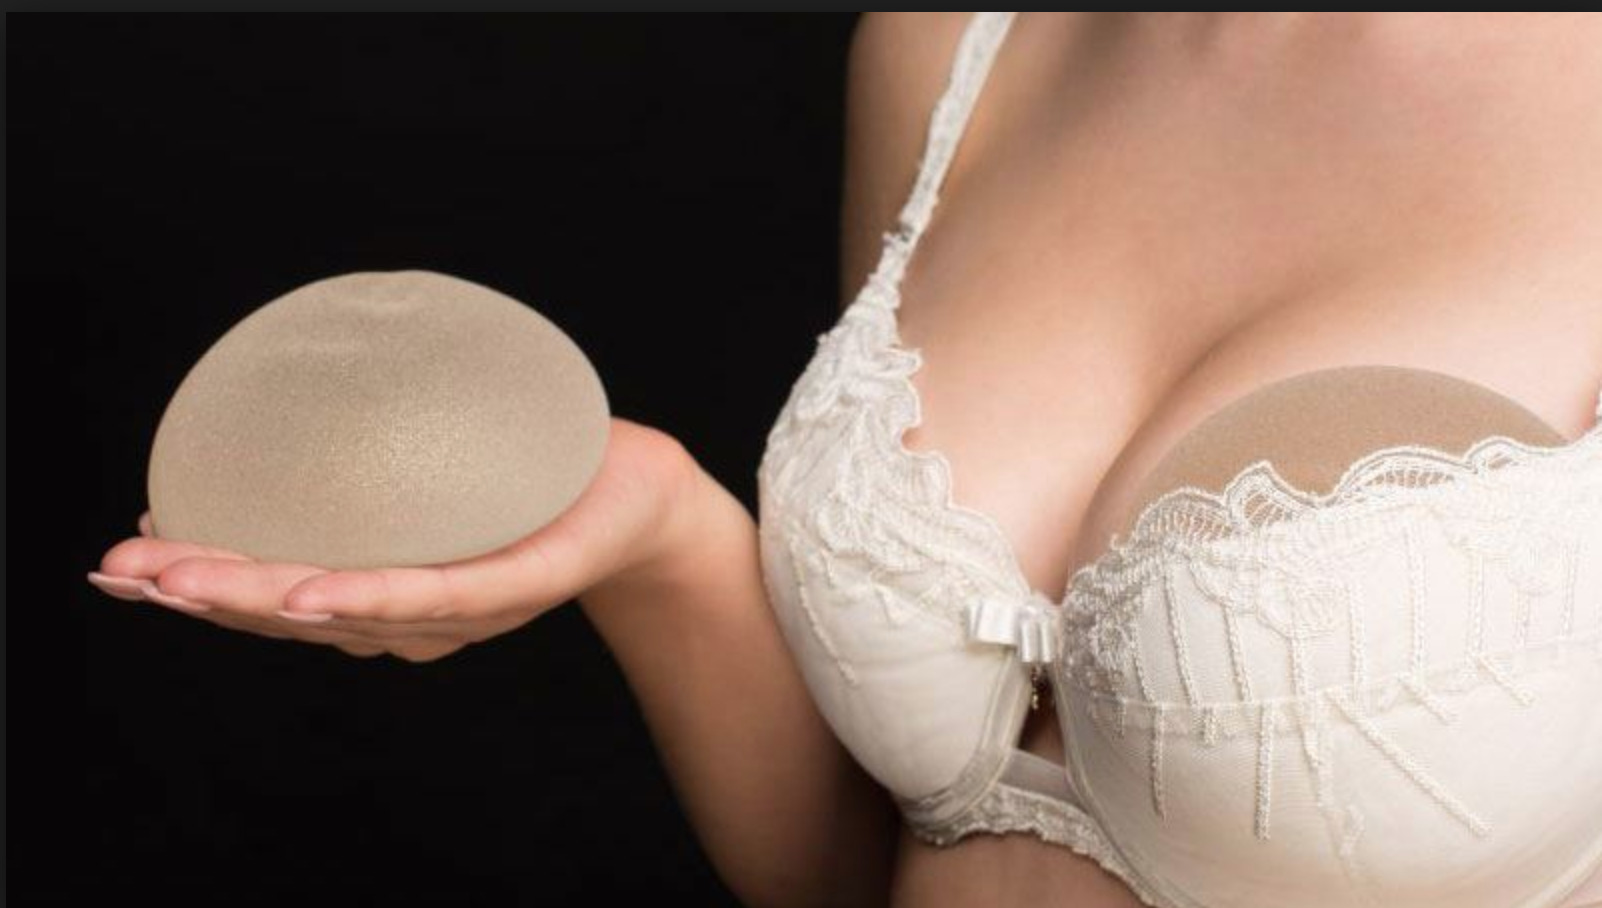 In A Divorce Who Owns Breast Implants?